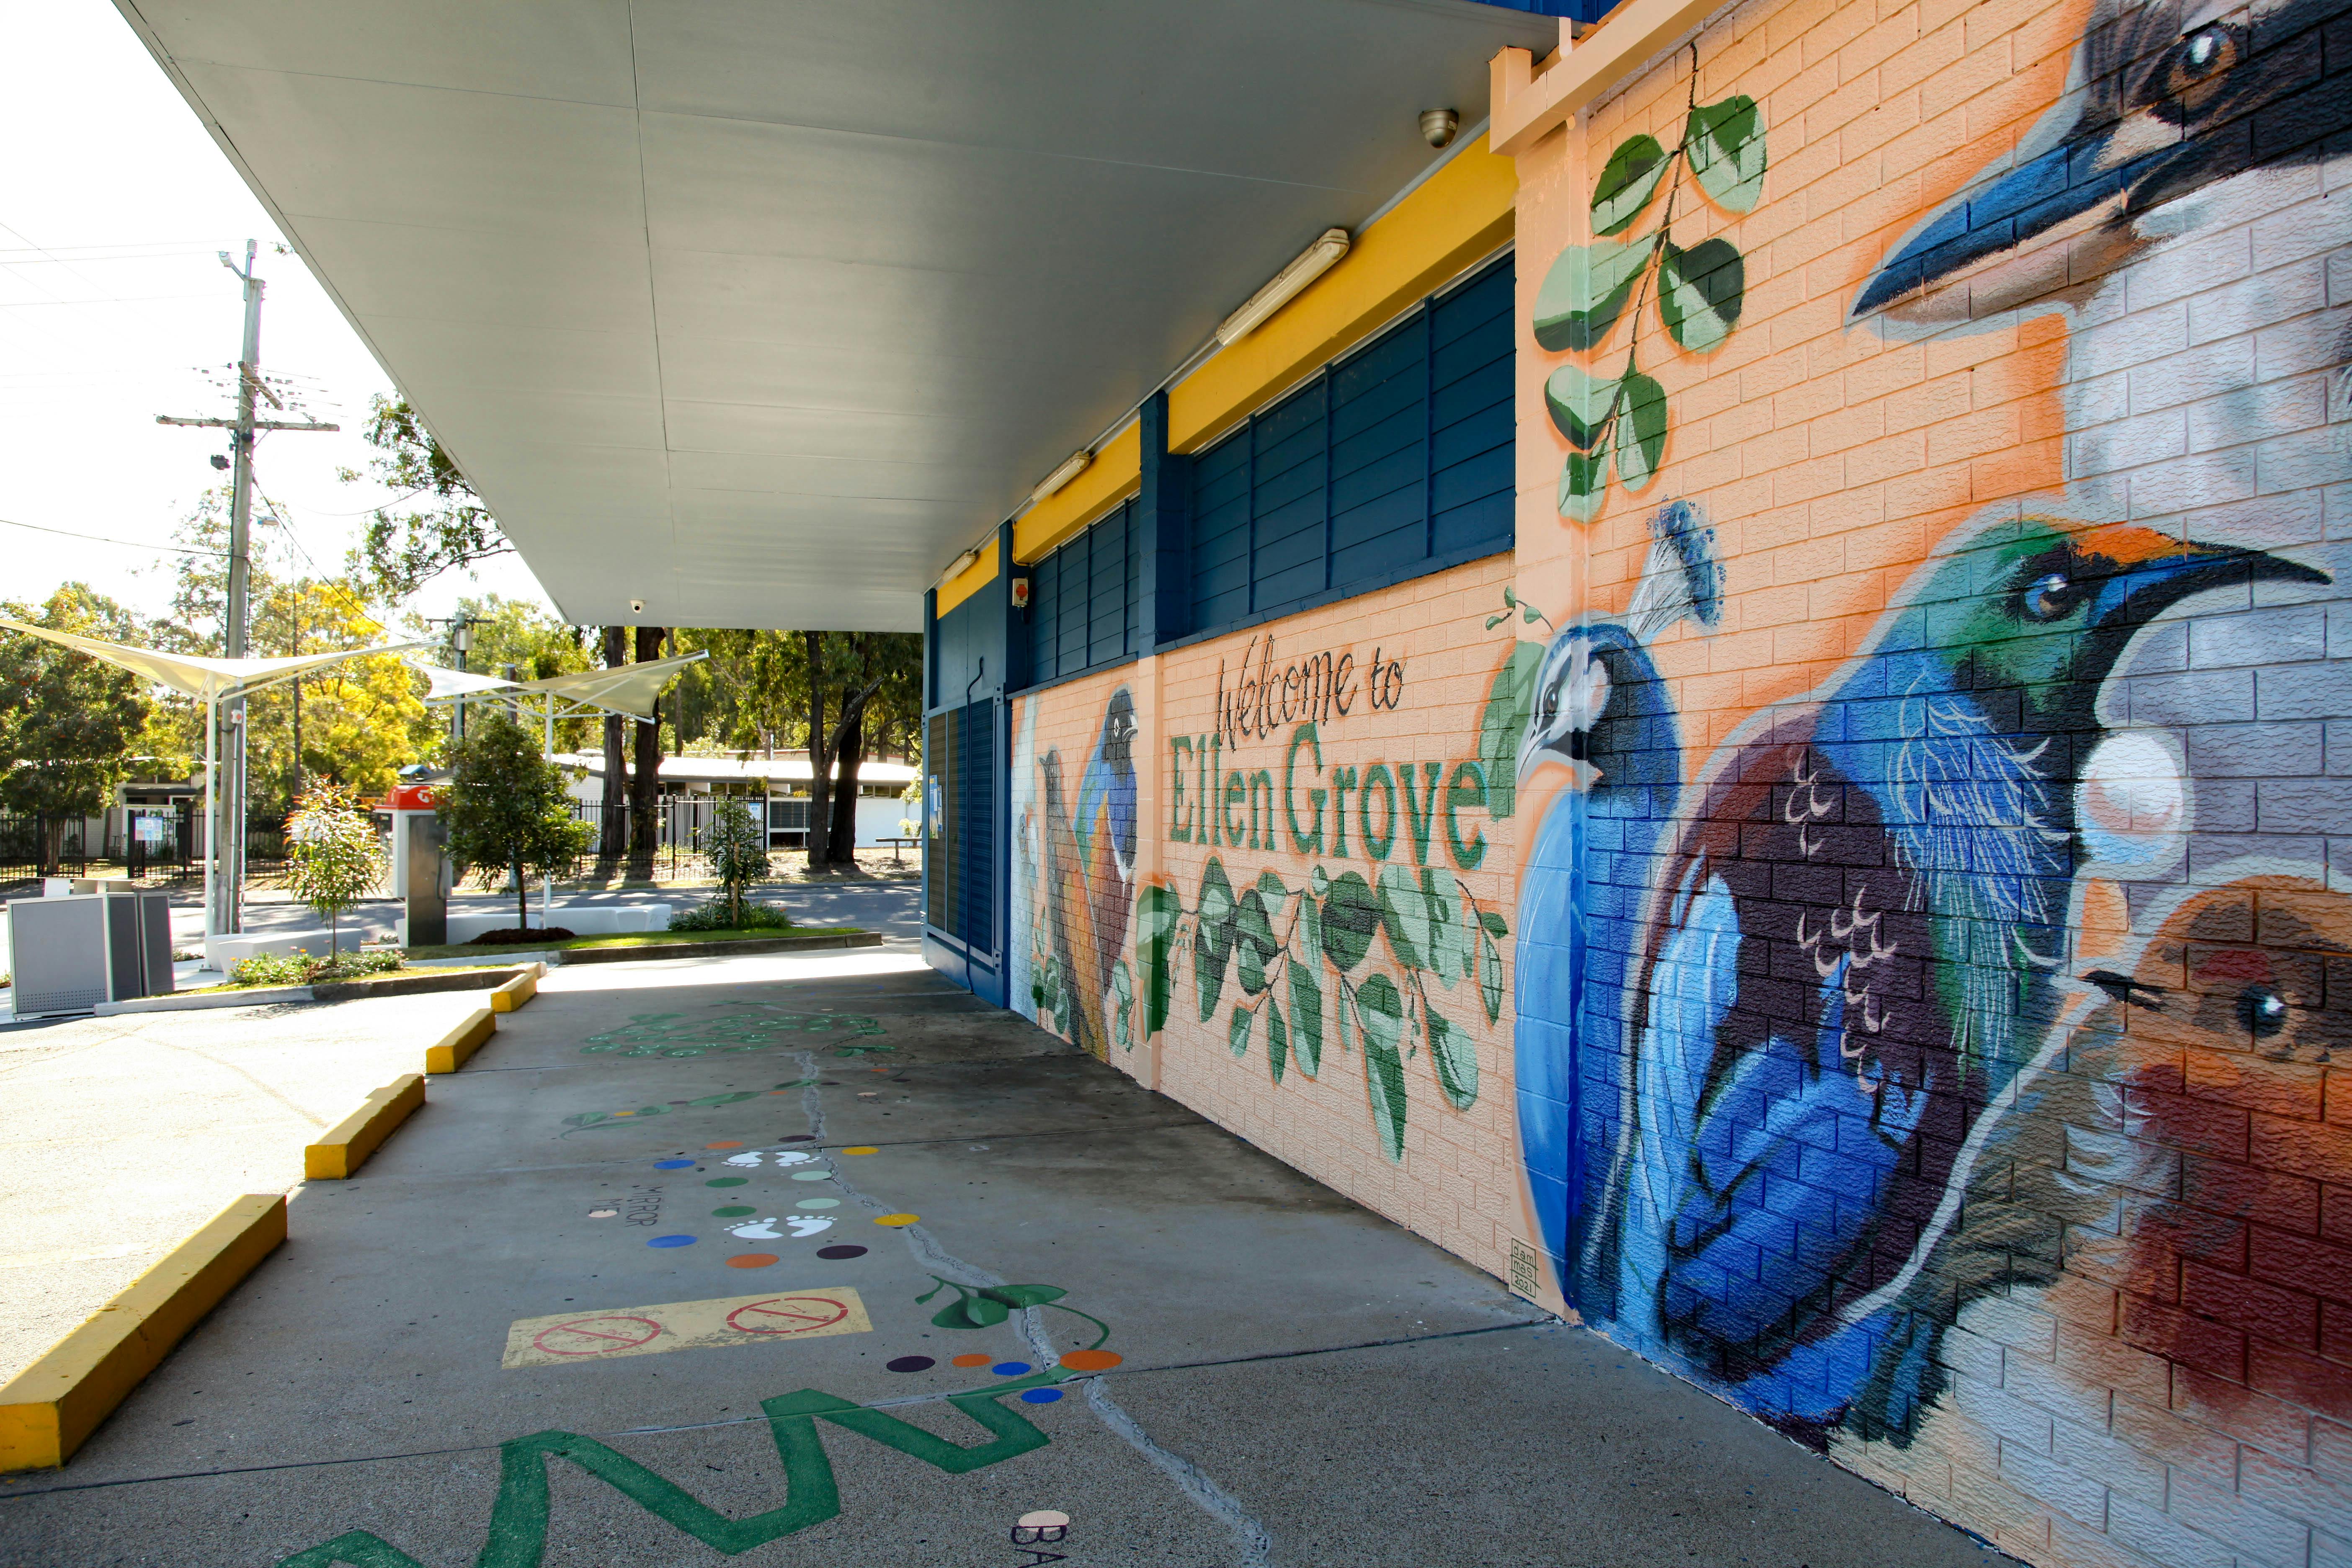 Photo of the 'Welcome to Ellen Grove' mural and ground games